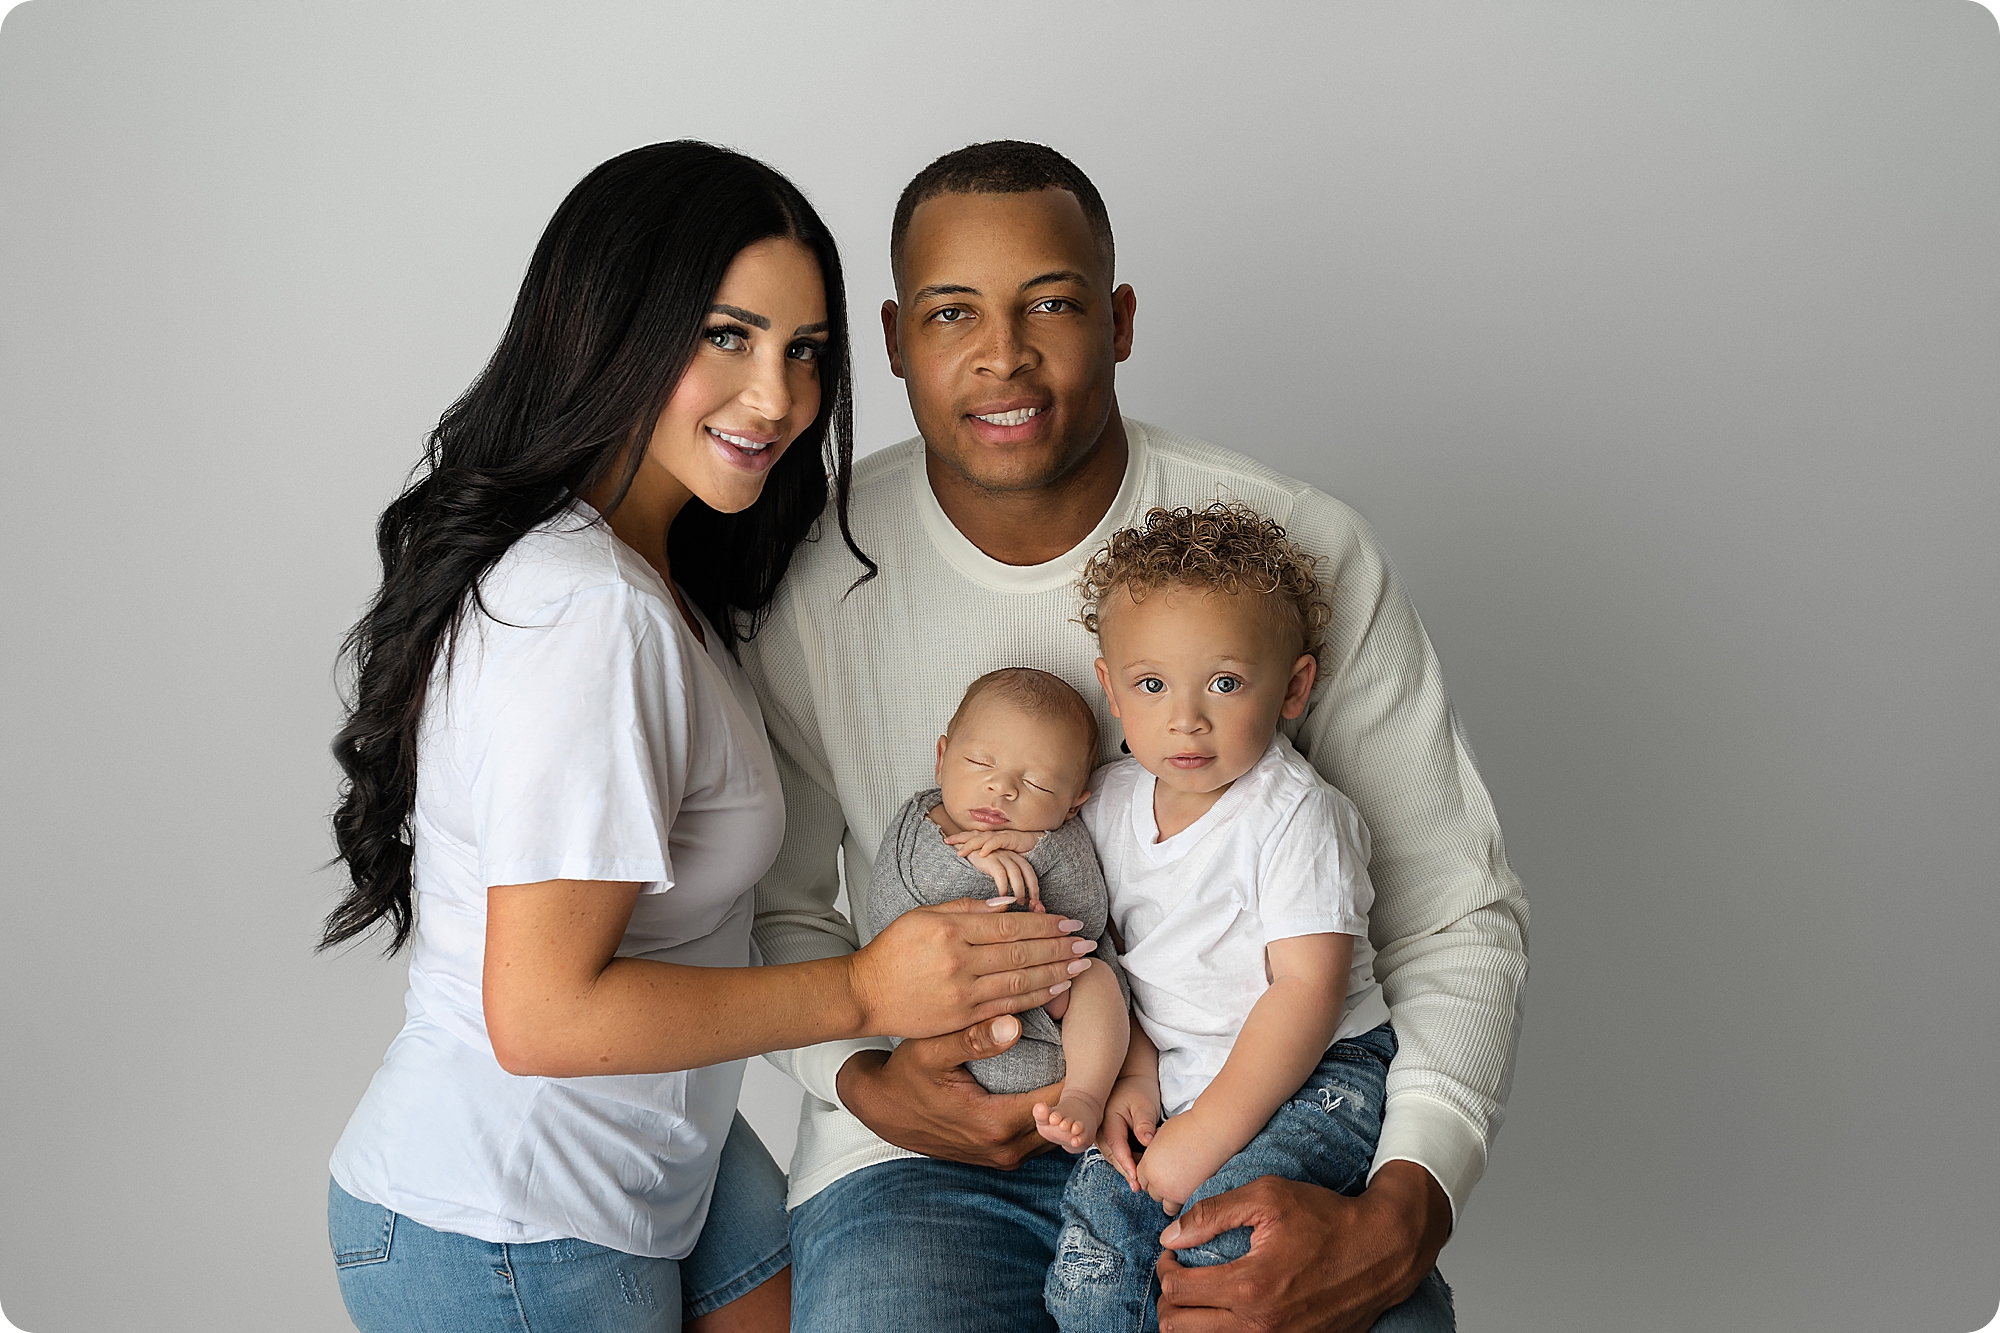 family sits together during newborn photos in Utah studio